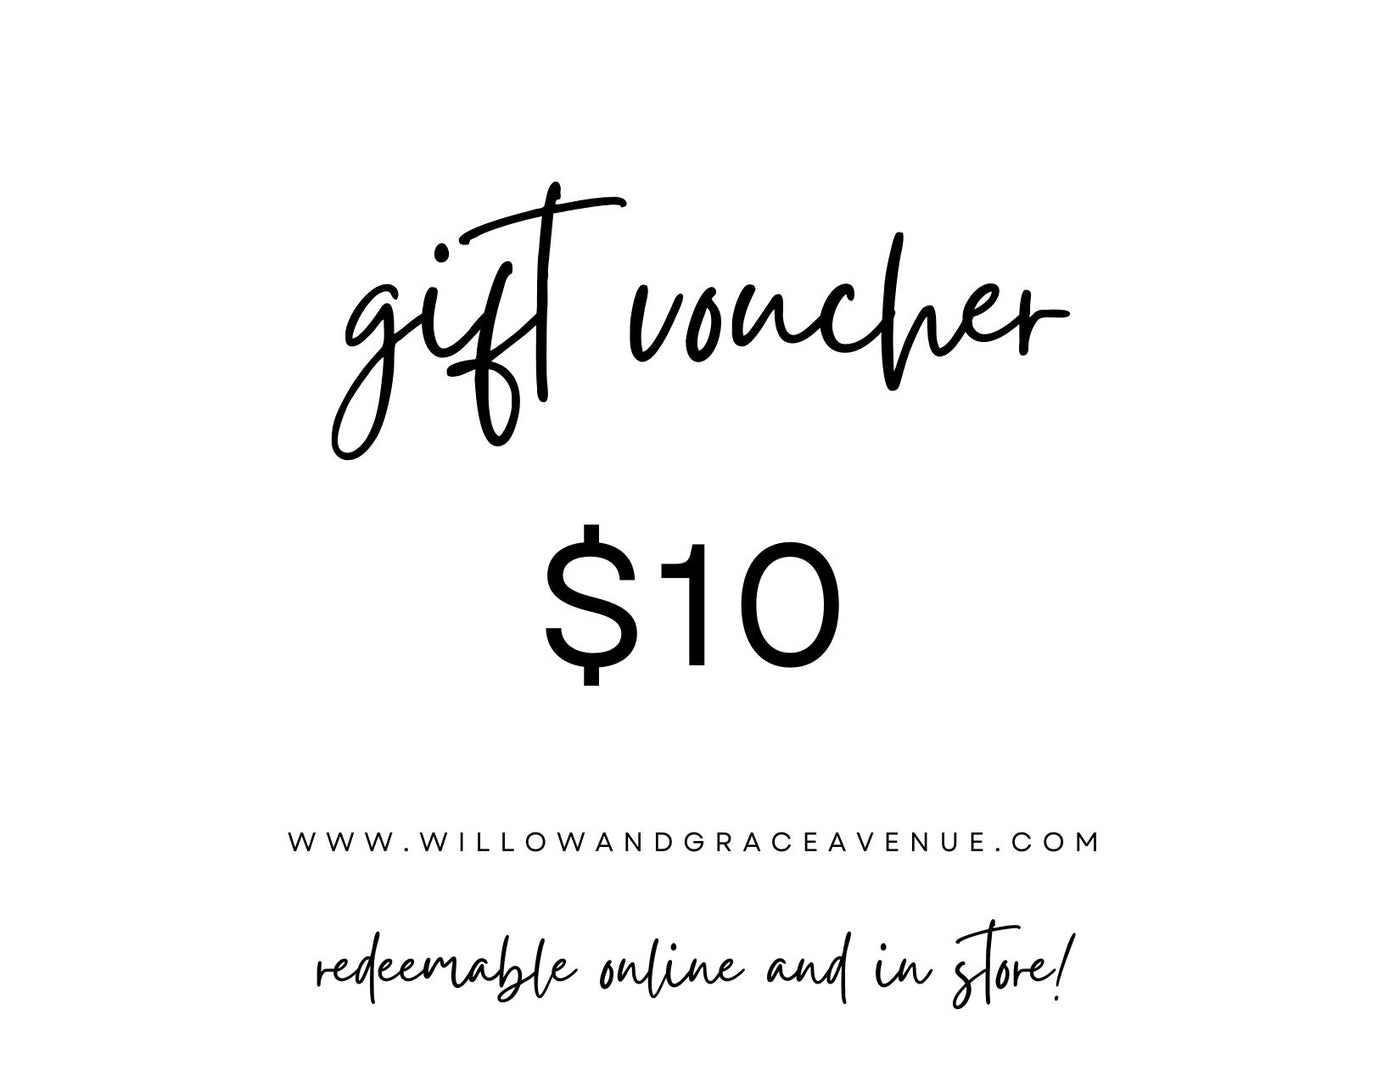 Willow & Grace Avenue Gift Card